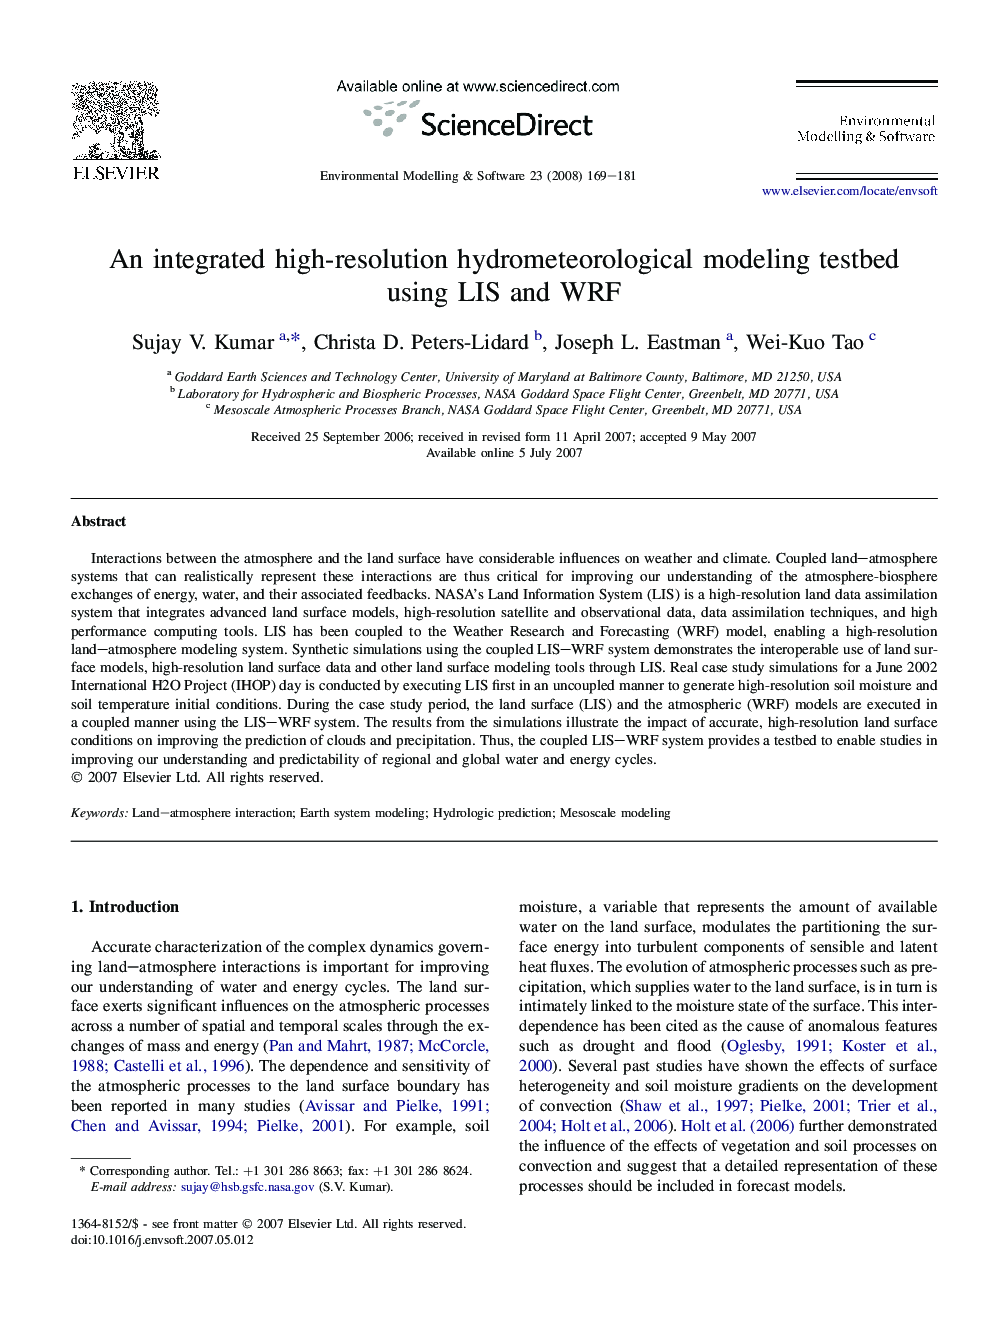 An integrated high-resolution hydrometeorological modeling testbed using LIS and WRF